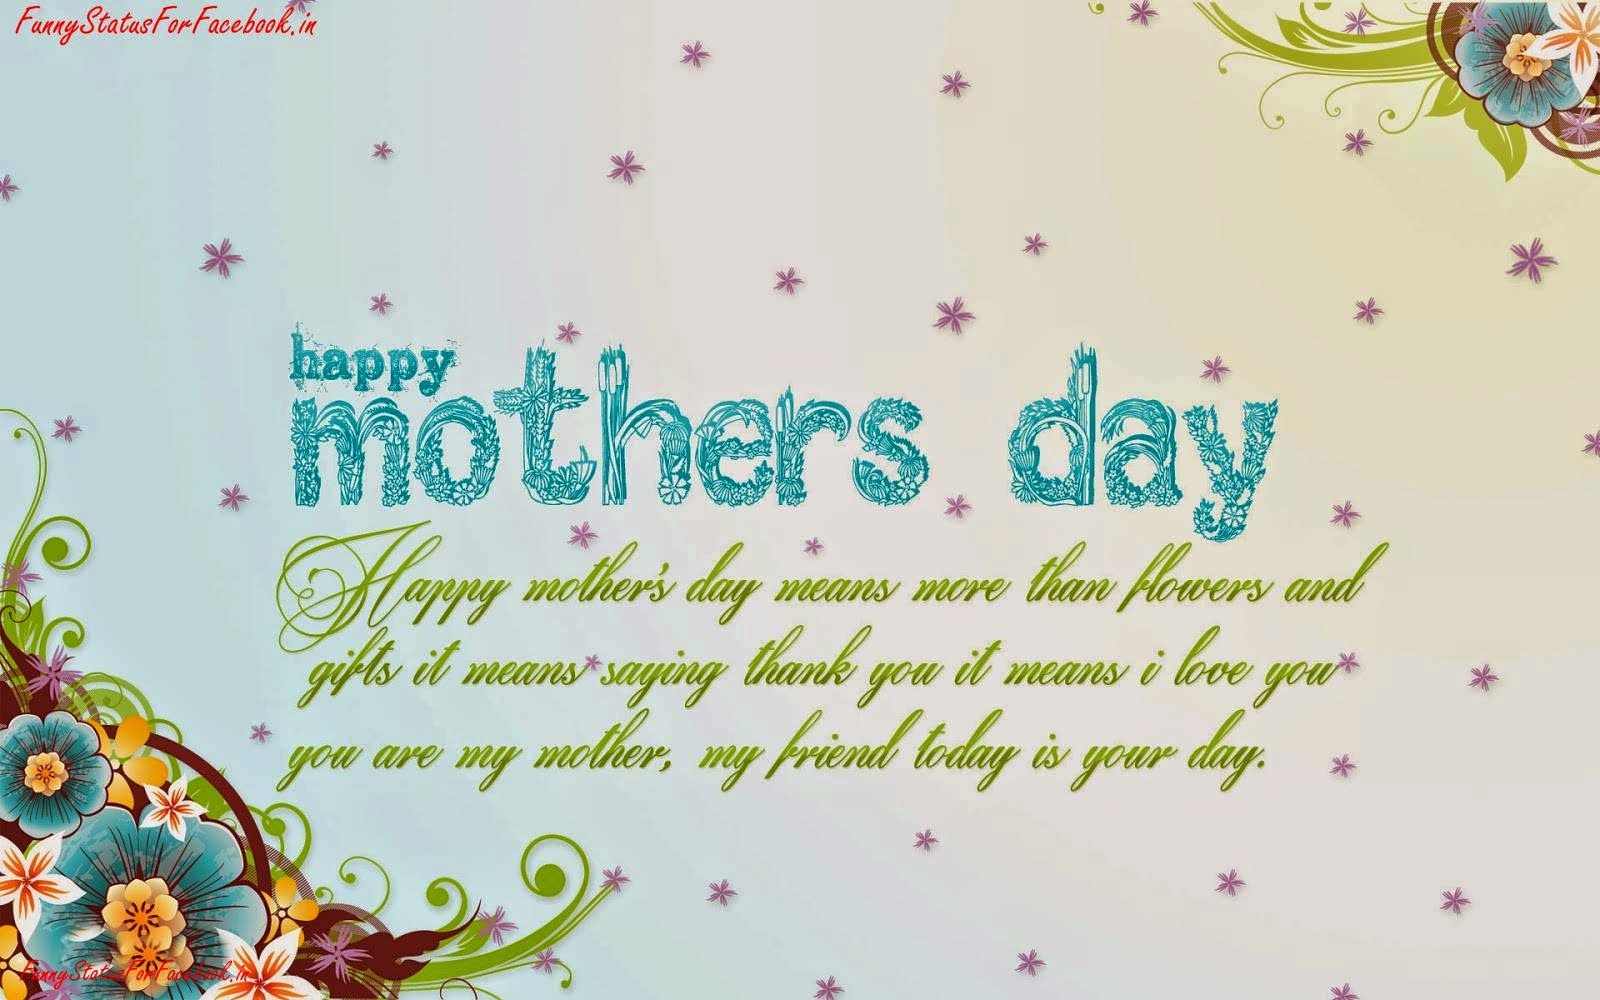 Happy Mothers Day Quotes Greeting Cards Wallpapers with Messages By Funnystatusfor